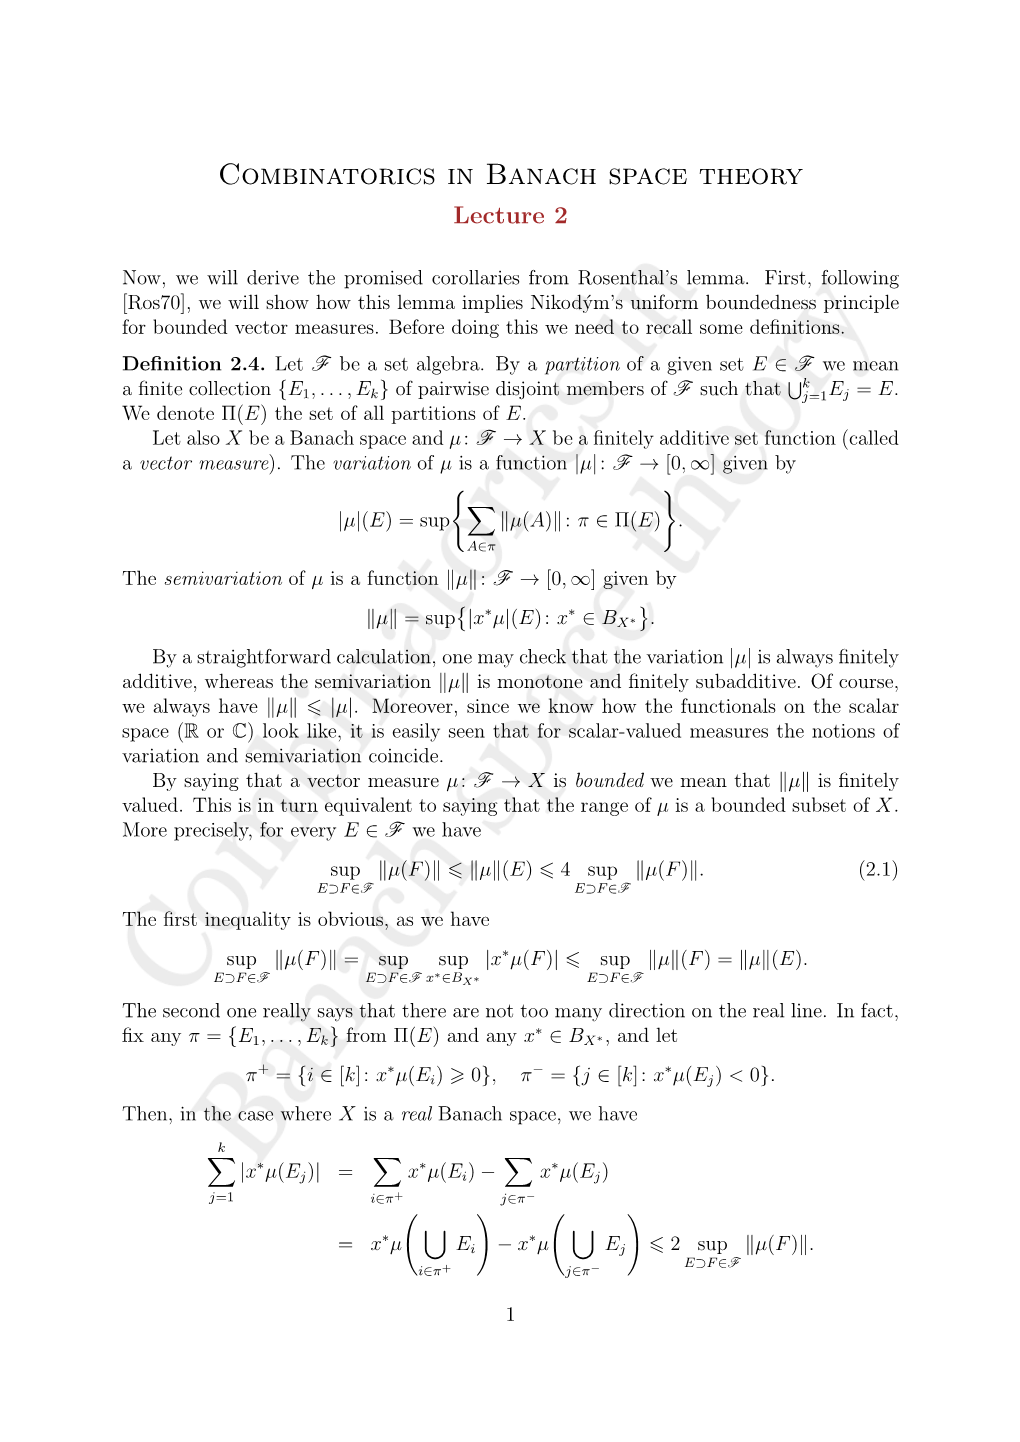 Combinatorics in Banach Space Theory Lecture 2